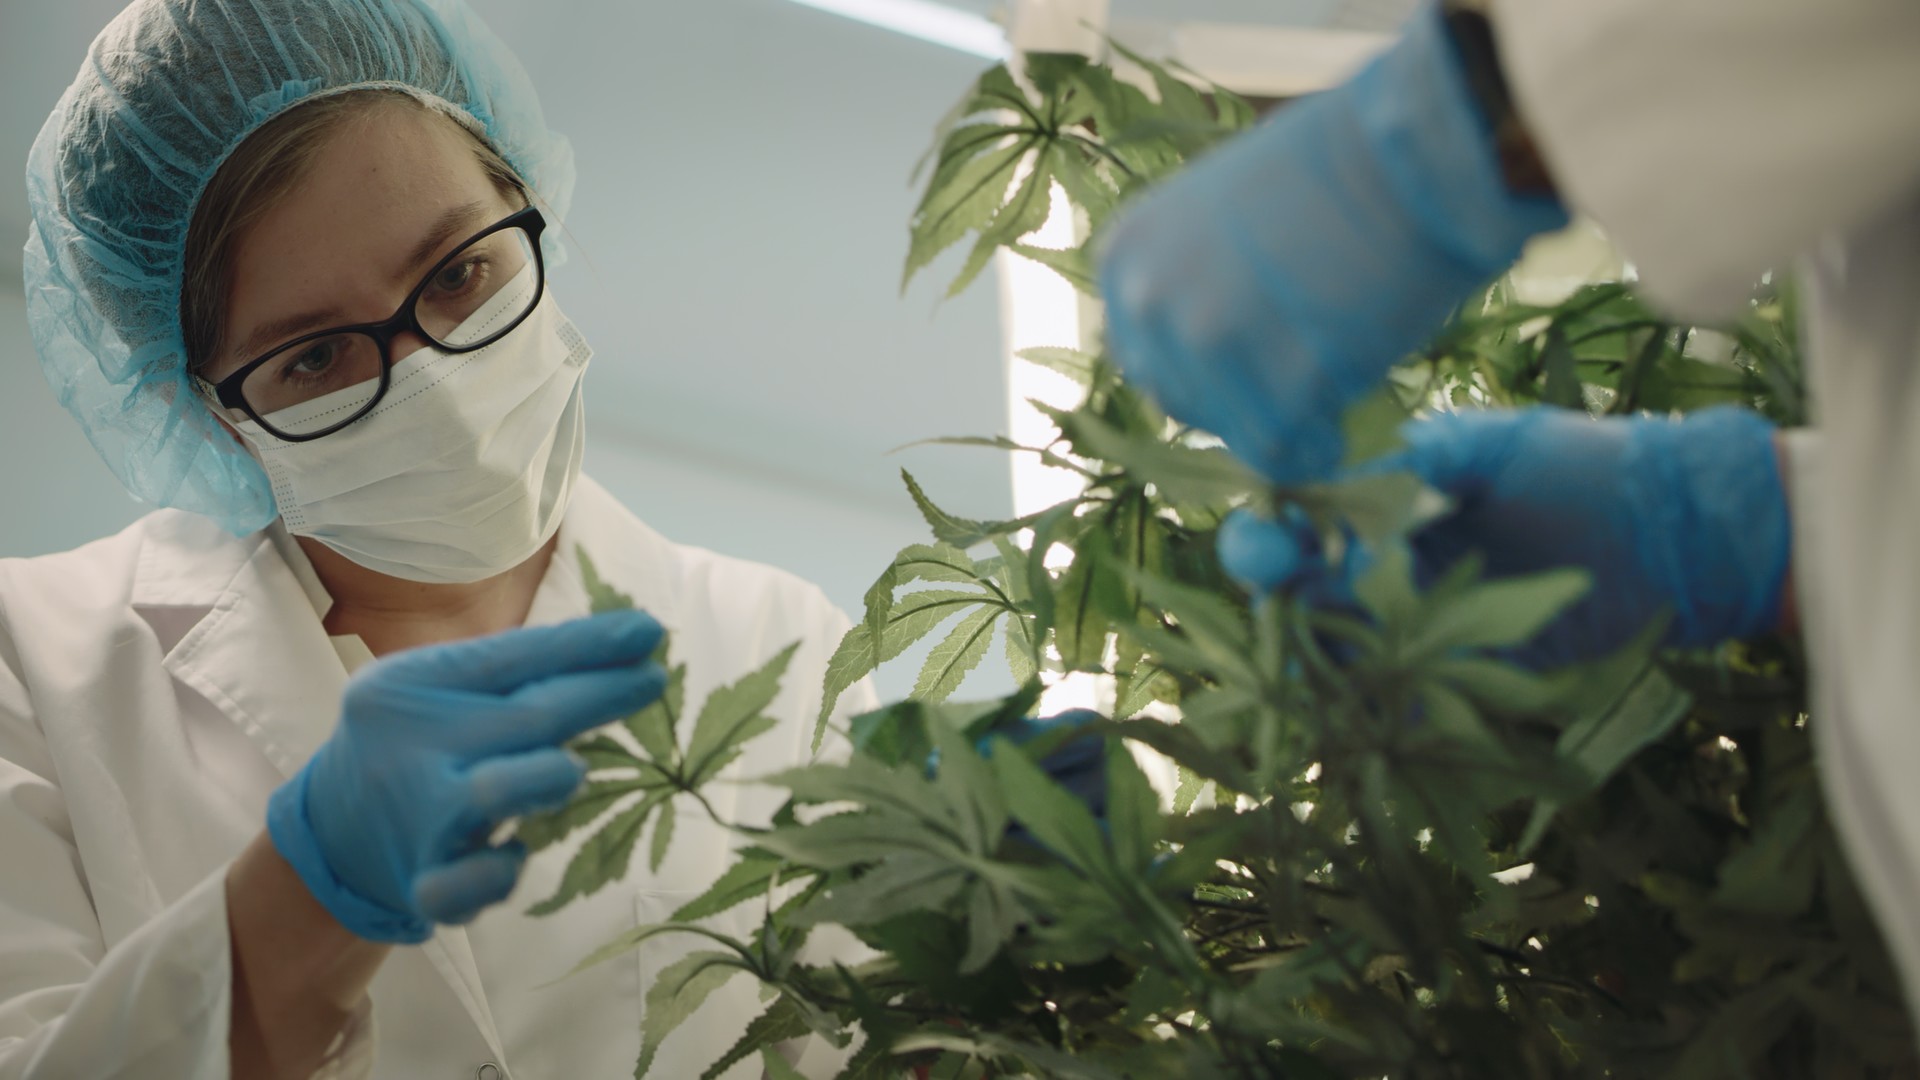 Female scientist inspecting a cannabis plant. She can be seen in the left side of the image wearing a blue hair net, black glasses and a white face mask. She is wearing blue gloves as she inspects one of the leaves. On the right side of the image, the hands of another scientist wearing blue gloves inspecting the plant can be seen but is blurred.